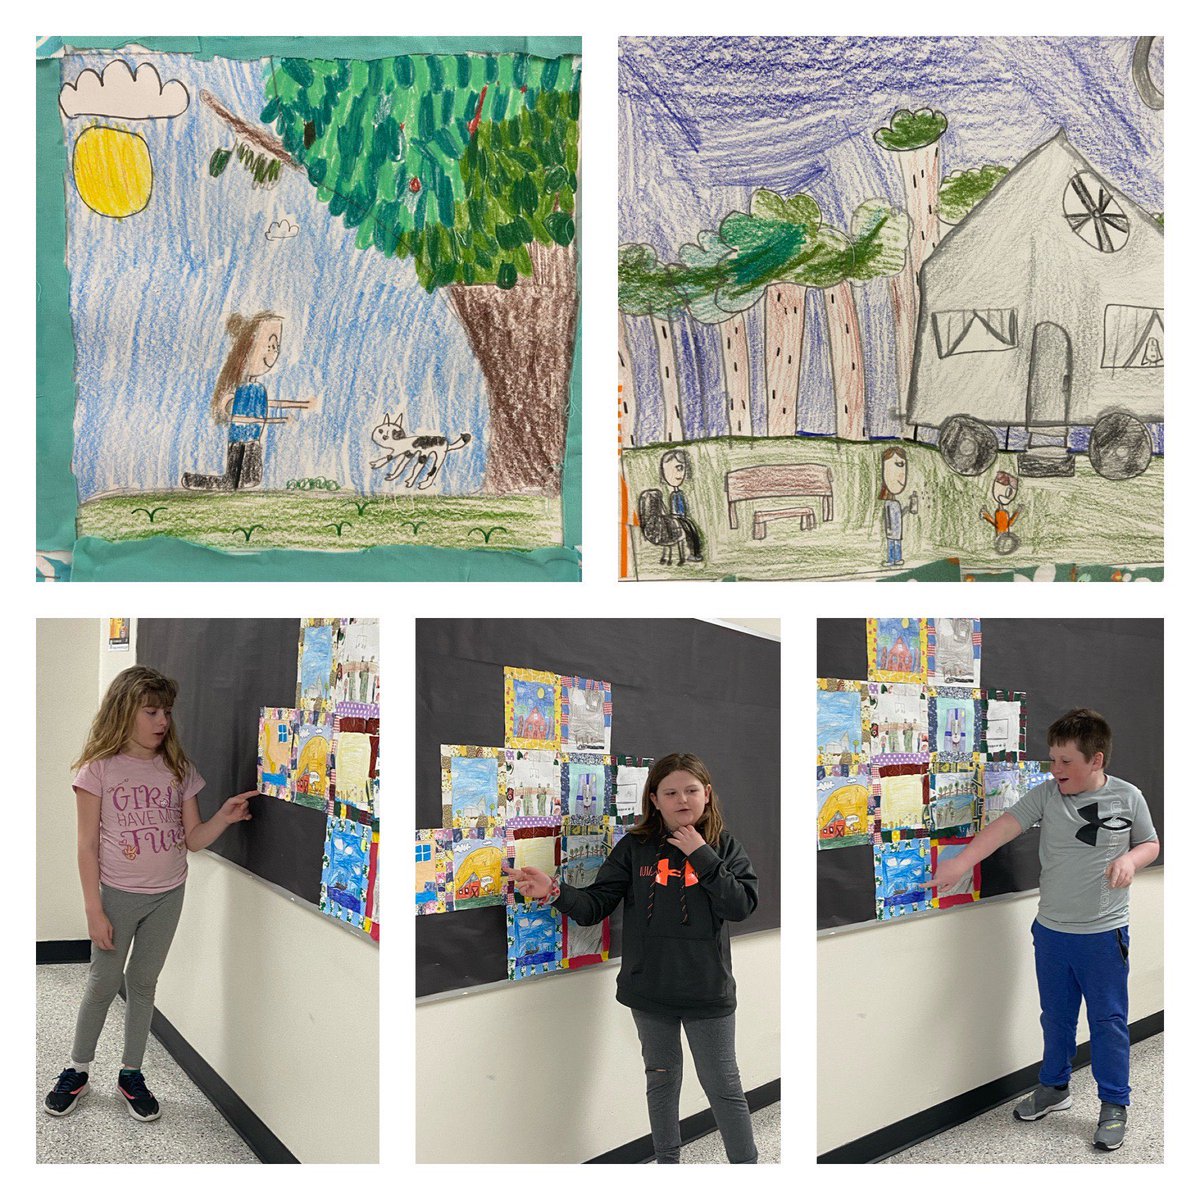 These third grade artist created memory quilt squares after studying  works of art by the famous artist Faith Ringgold.

After putting their works on display the student had the opportunity to describe their happiest memories. 
#ElmwoodSchools 
#Artstudents